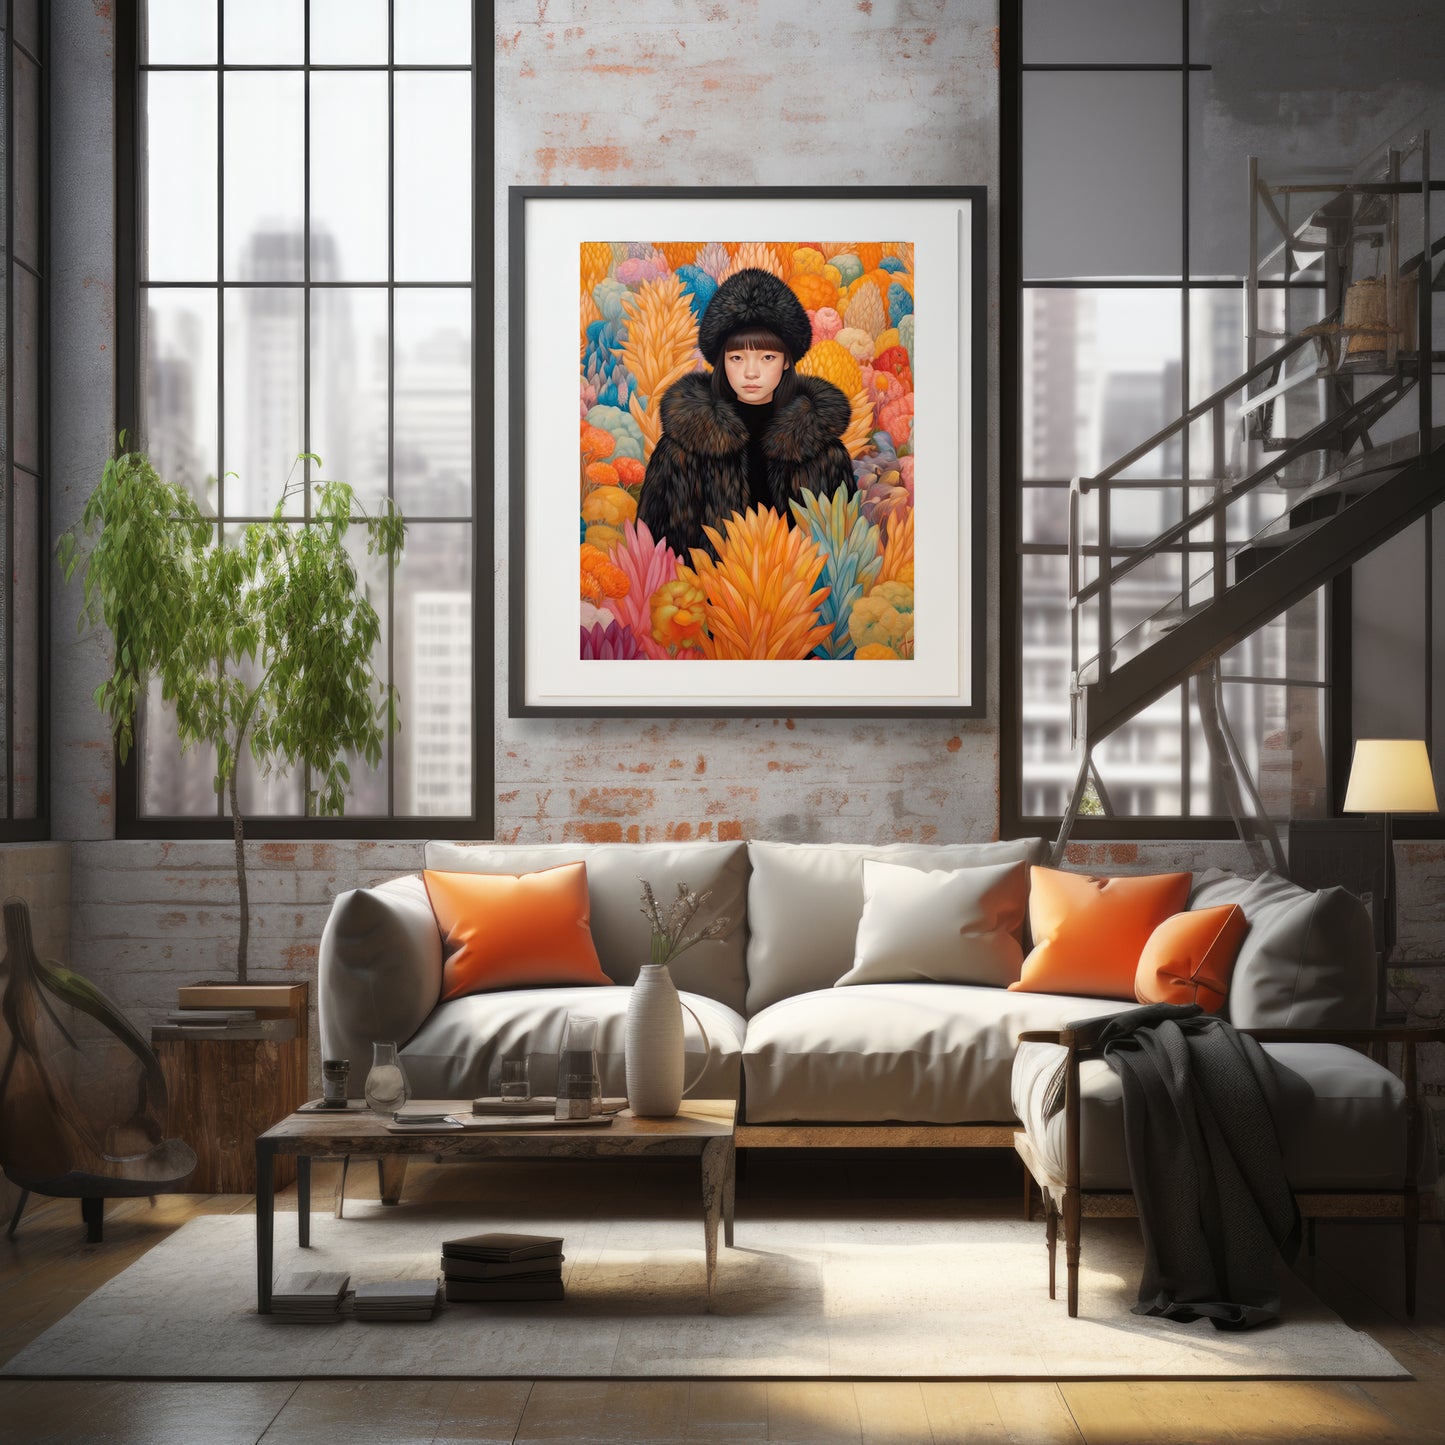 Art print showcasing a woman in a black coat and hat, surrounded by a vibrant, colorful array of oversized, abstract flowers. This fine art print captures a timeless, elegant scene.